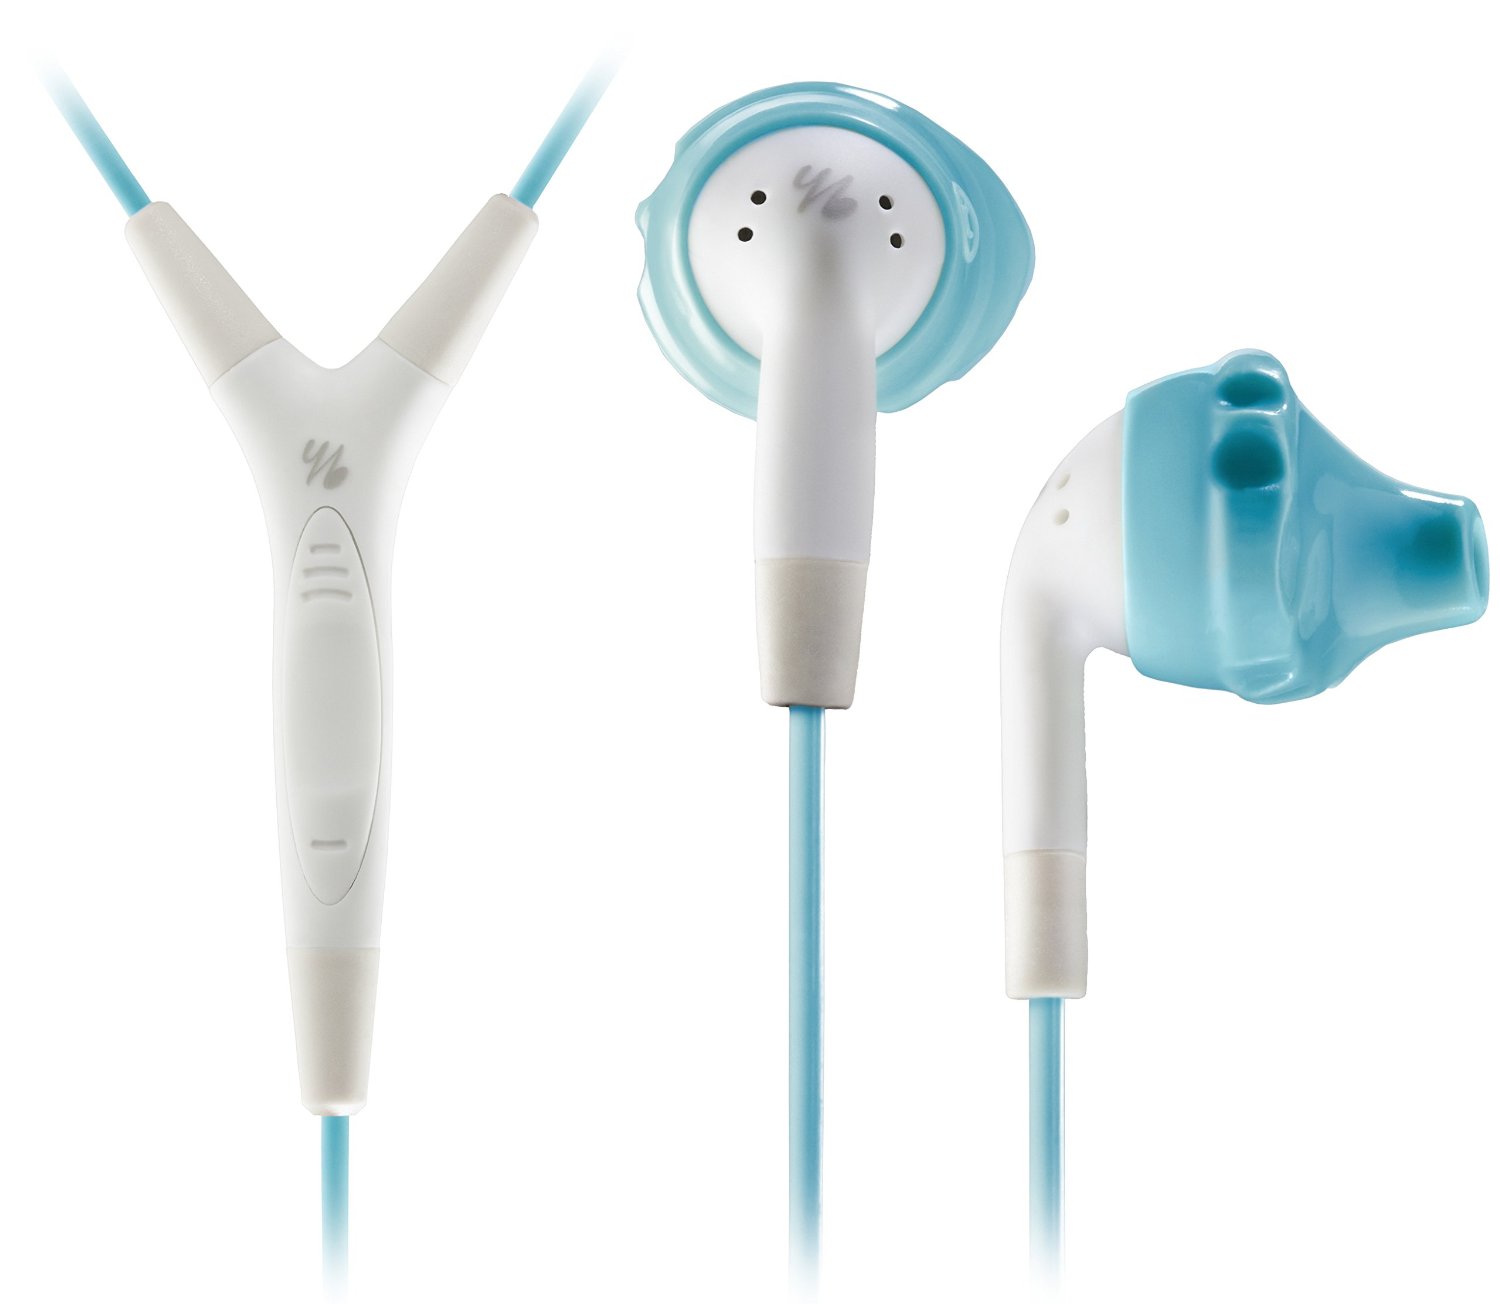 Yur Buds- best earphones for the active ear, built for a woman. #ad